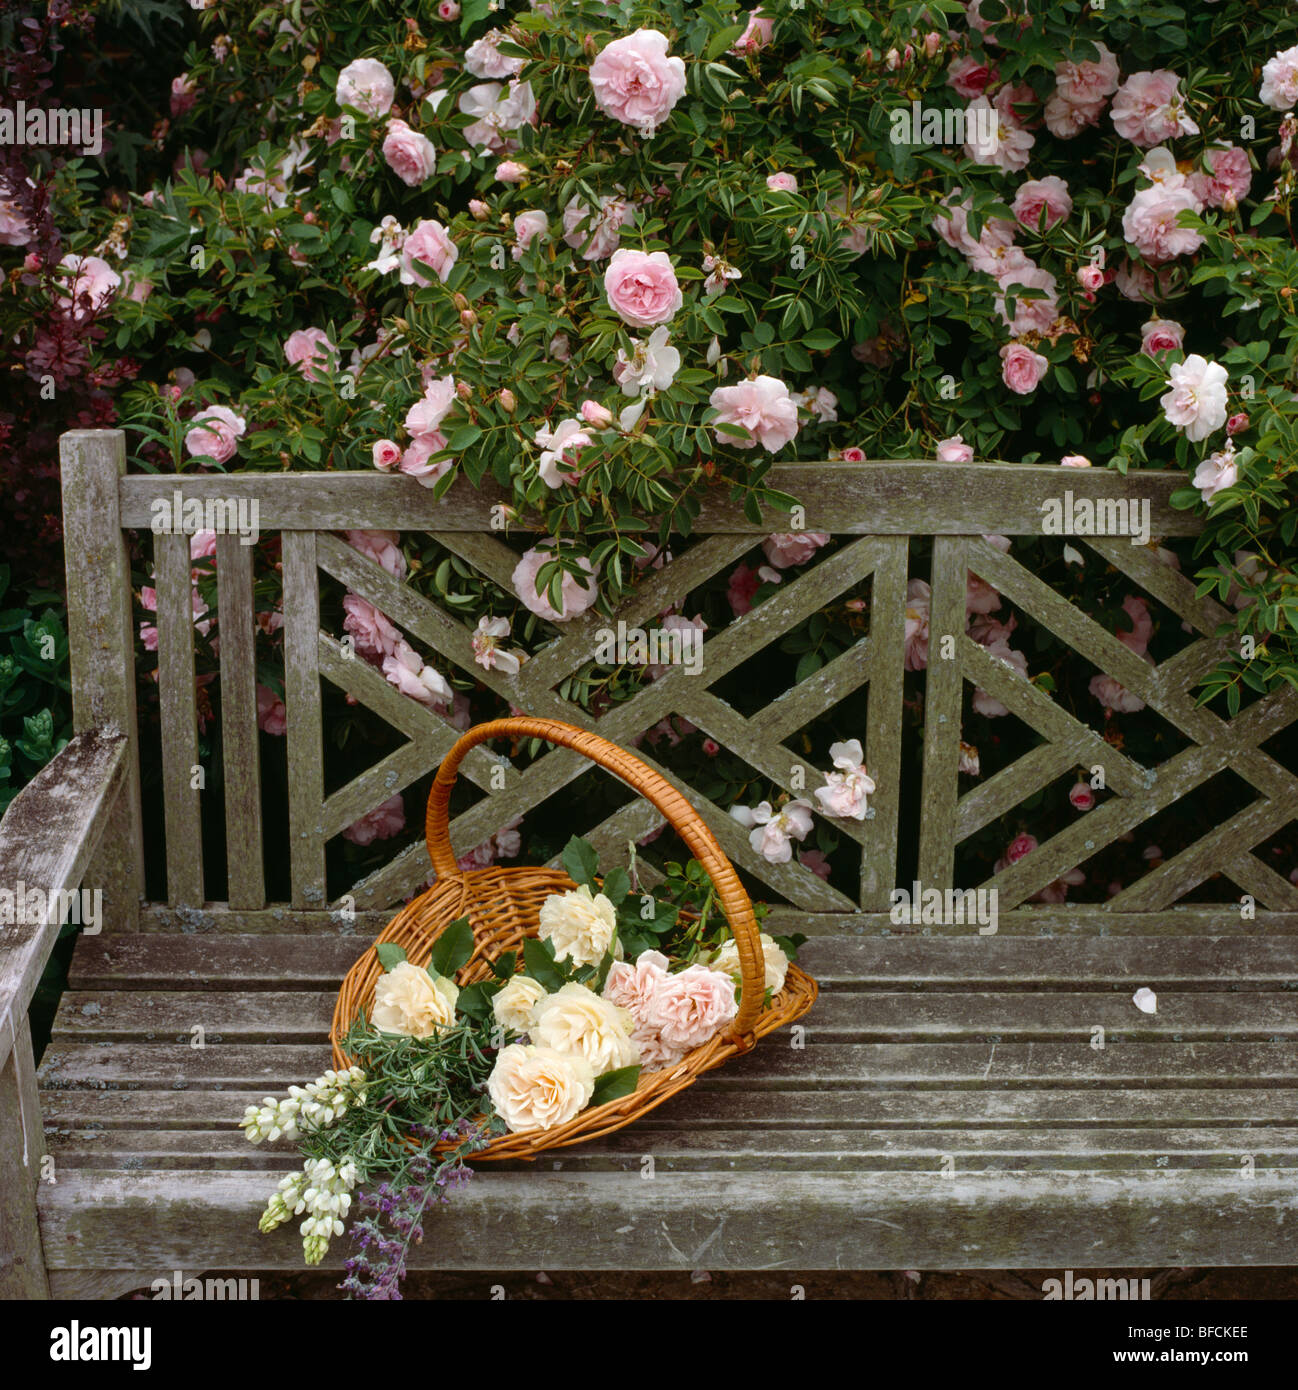 Basket of cream roses on a wooden garden bench in front of pink rose bush Stock Photo